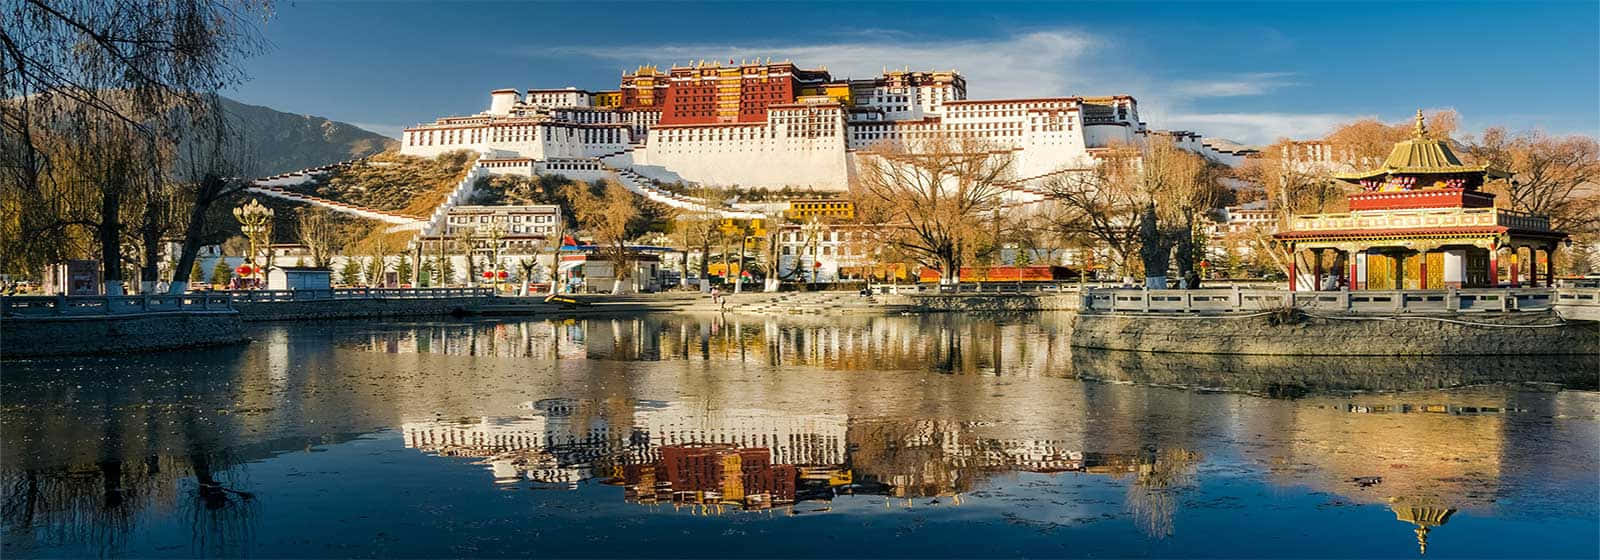 Sunny Day In Lhasa Wallpaper